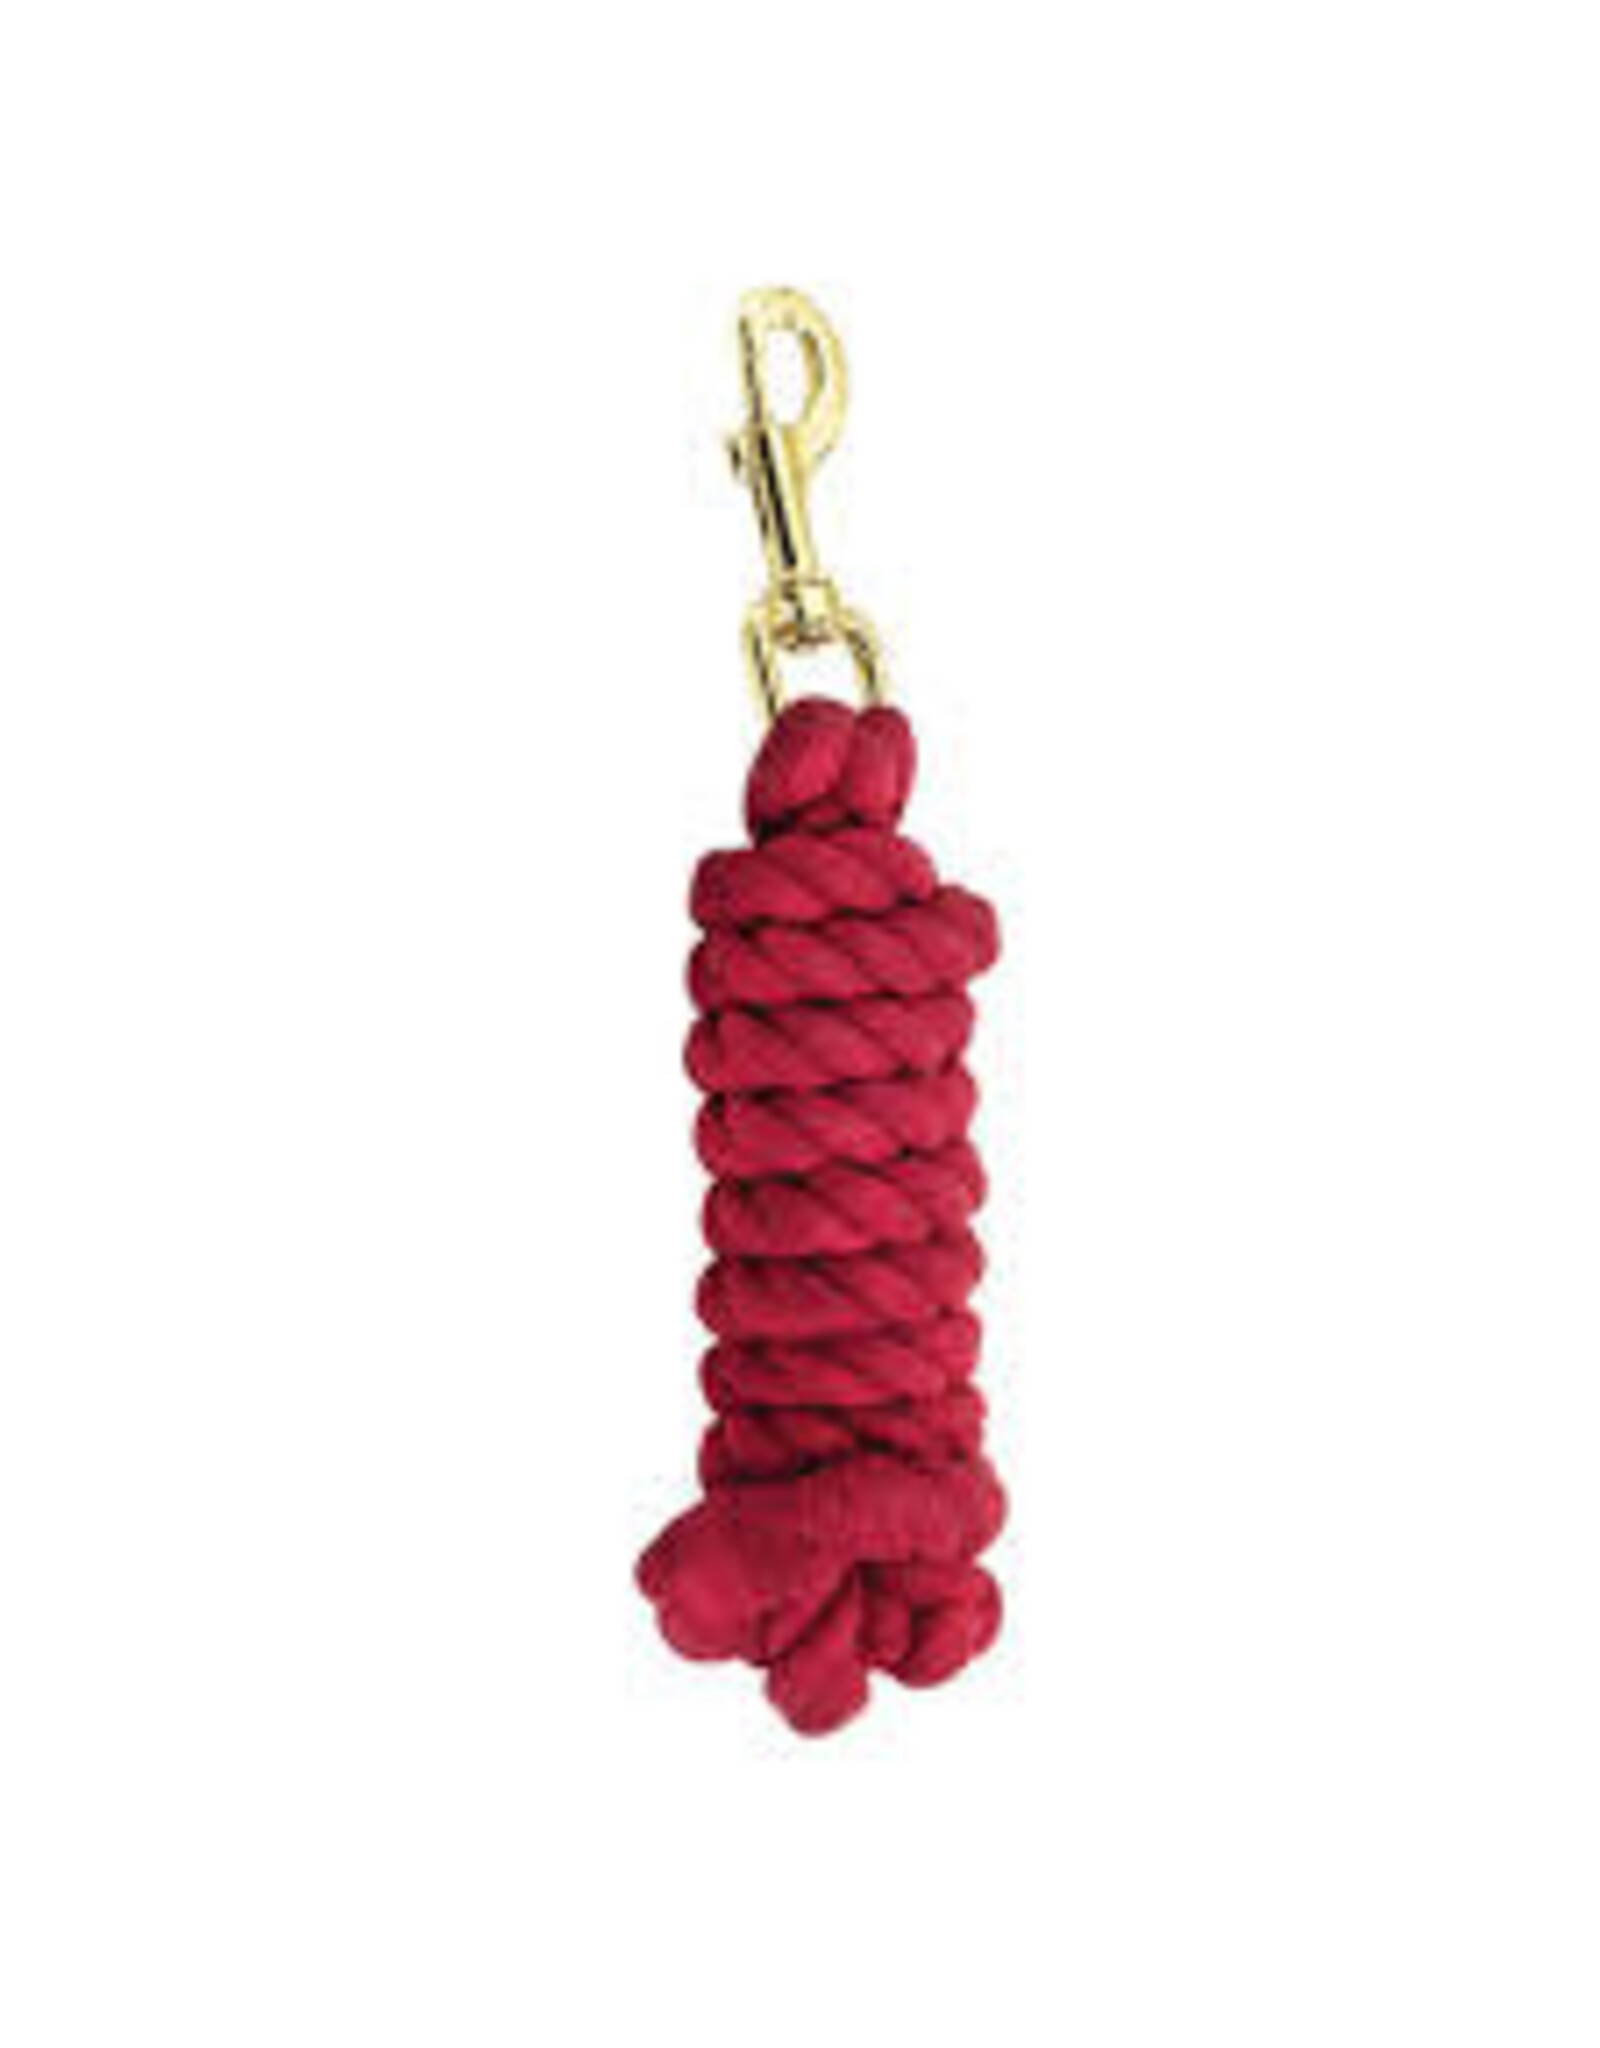 Cotton Rope Lead Shank 9/16" - 6' / Brass Bolt Snap -  Red - TP2509A-RE